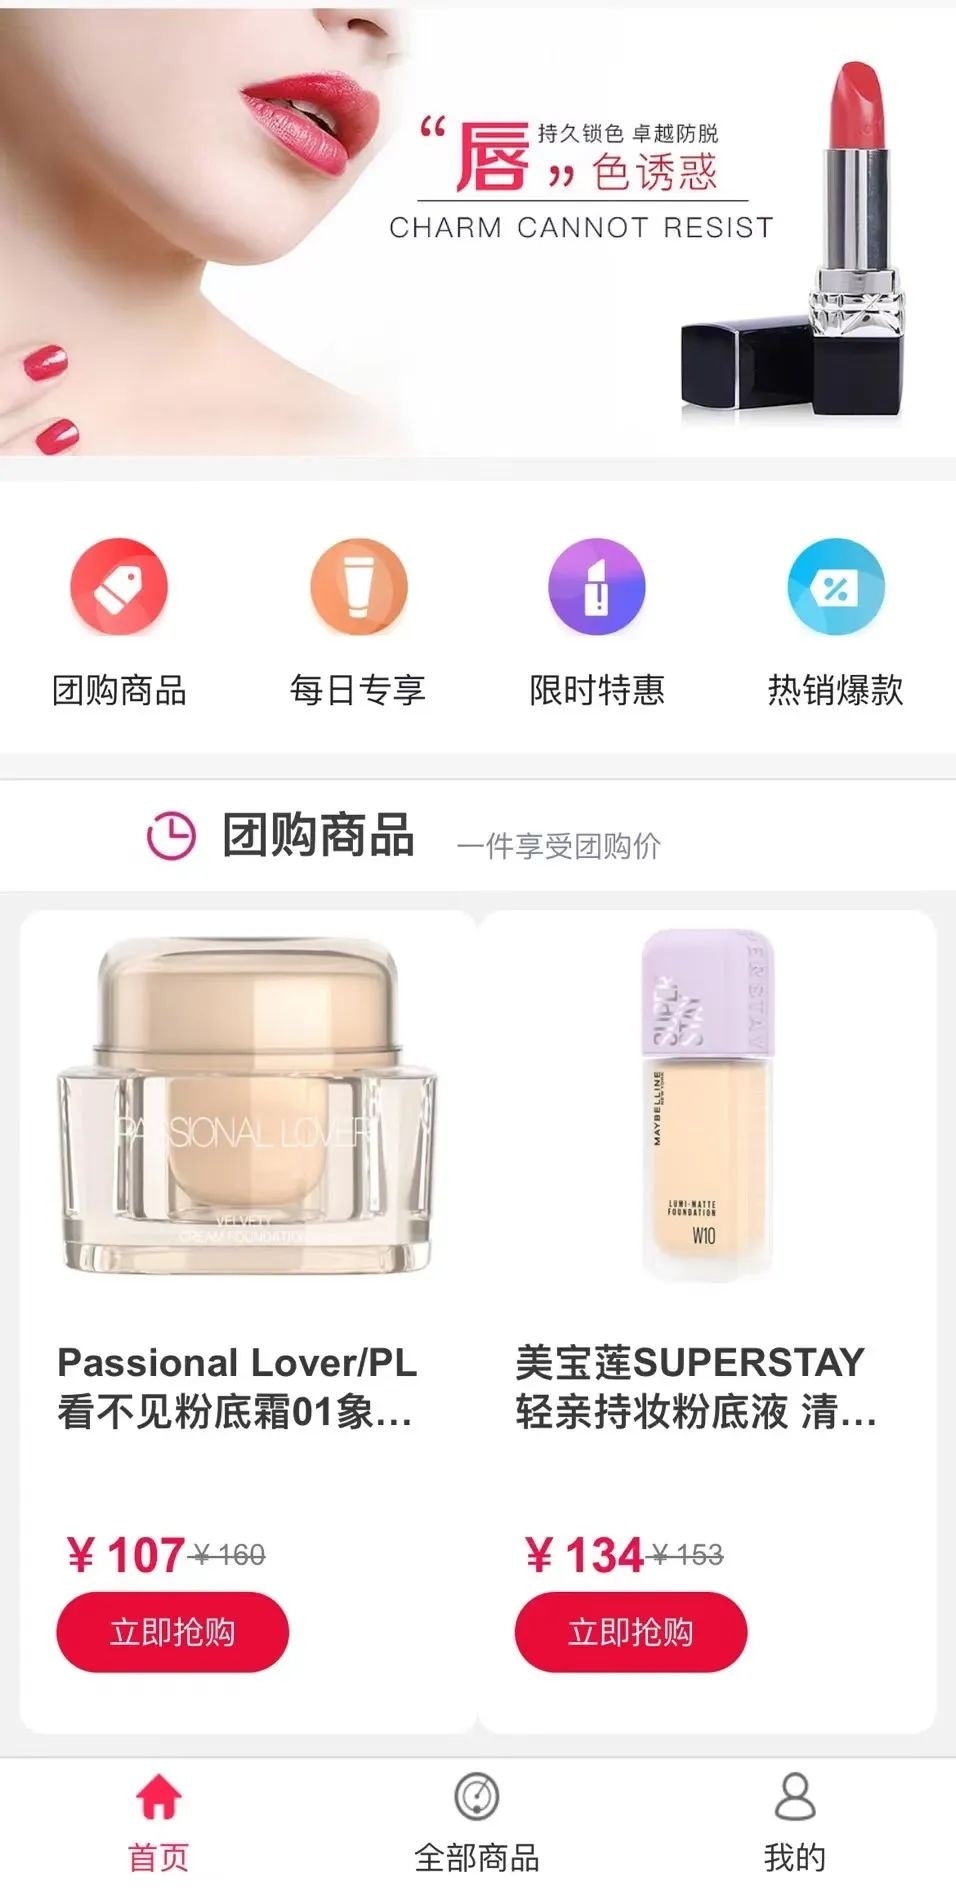 Will the standalone beauty app Treasure Exchange Market help Alibaba expand its footprint in the online beauty market, or cannablize its stablemates' sales? 
Photo: Treasure Market app screen grab. 

